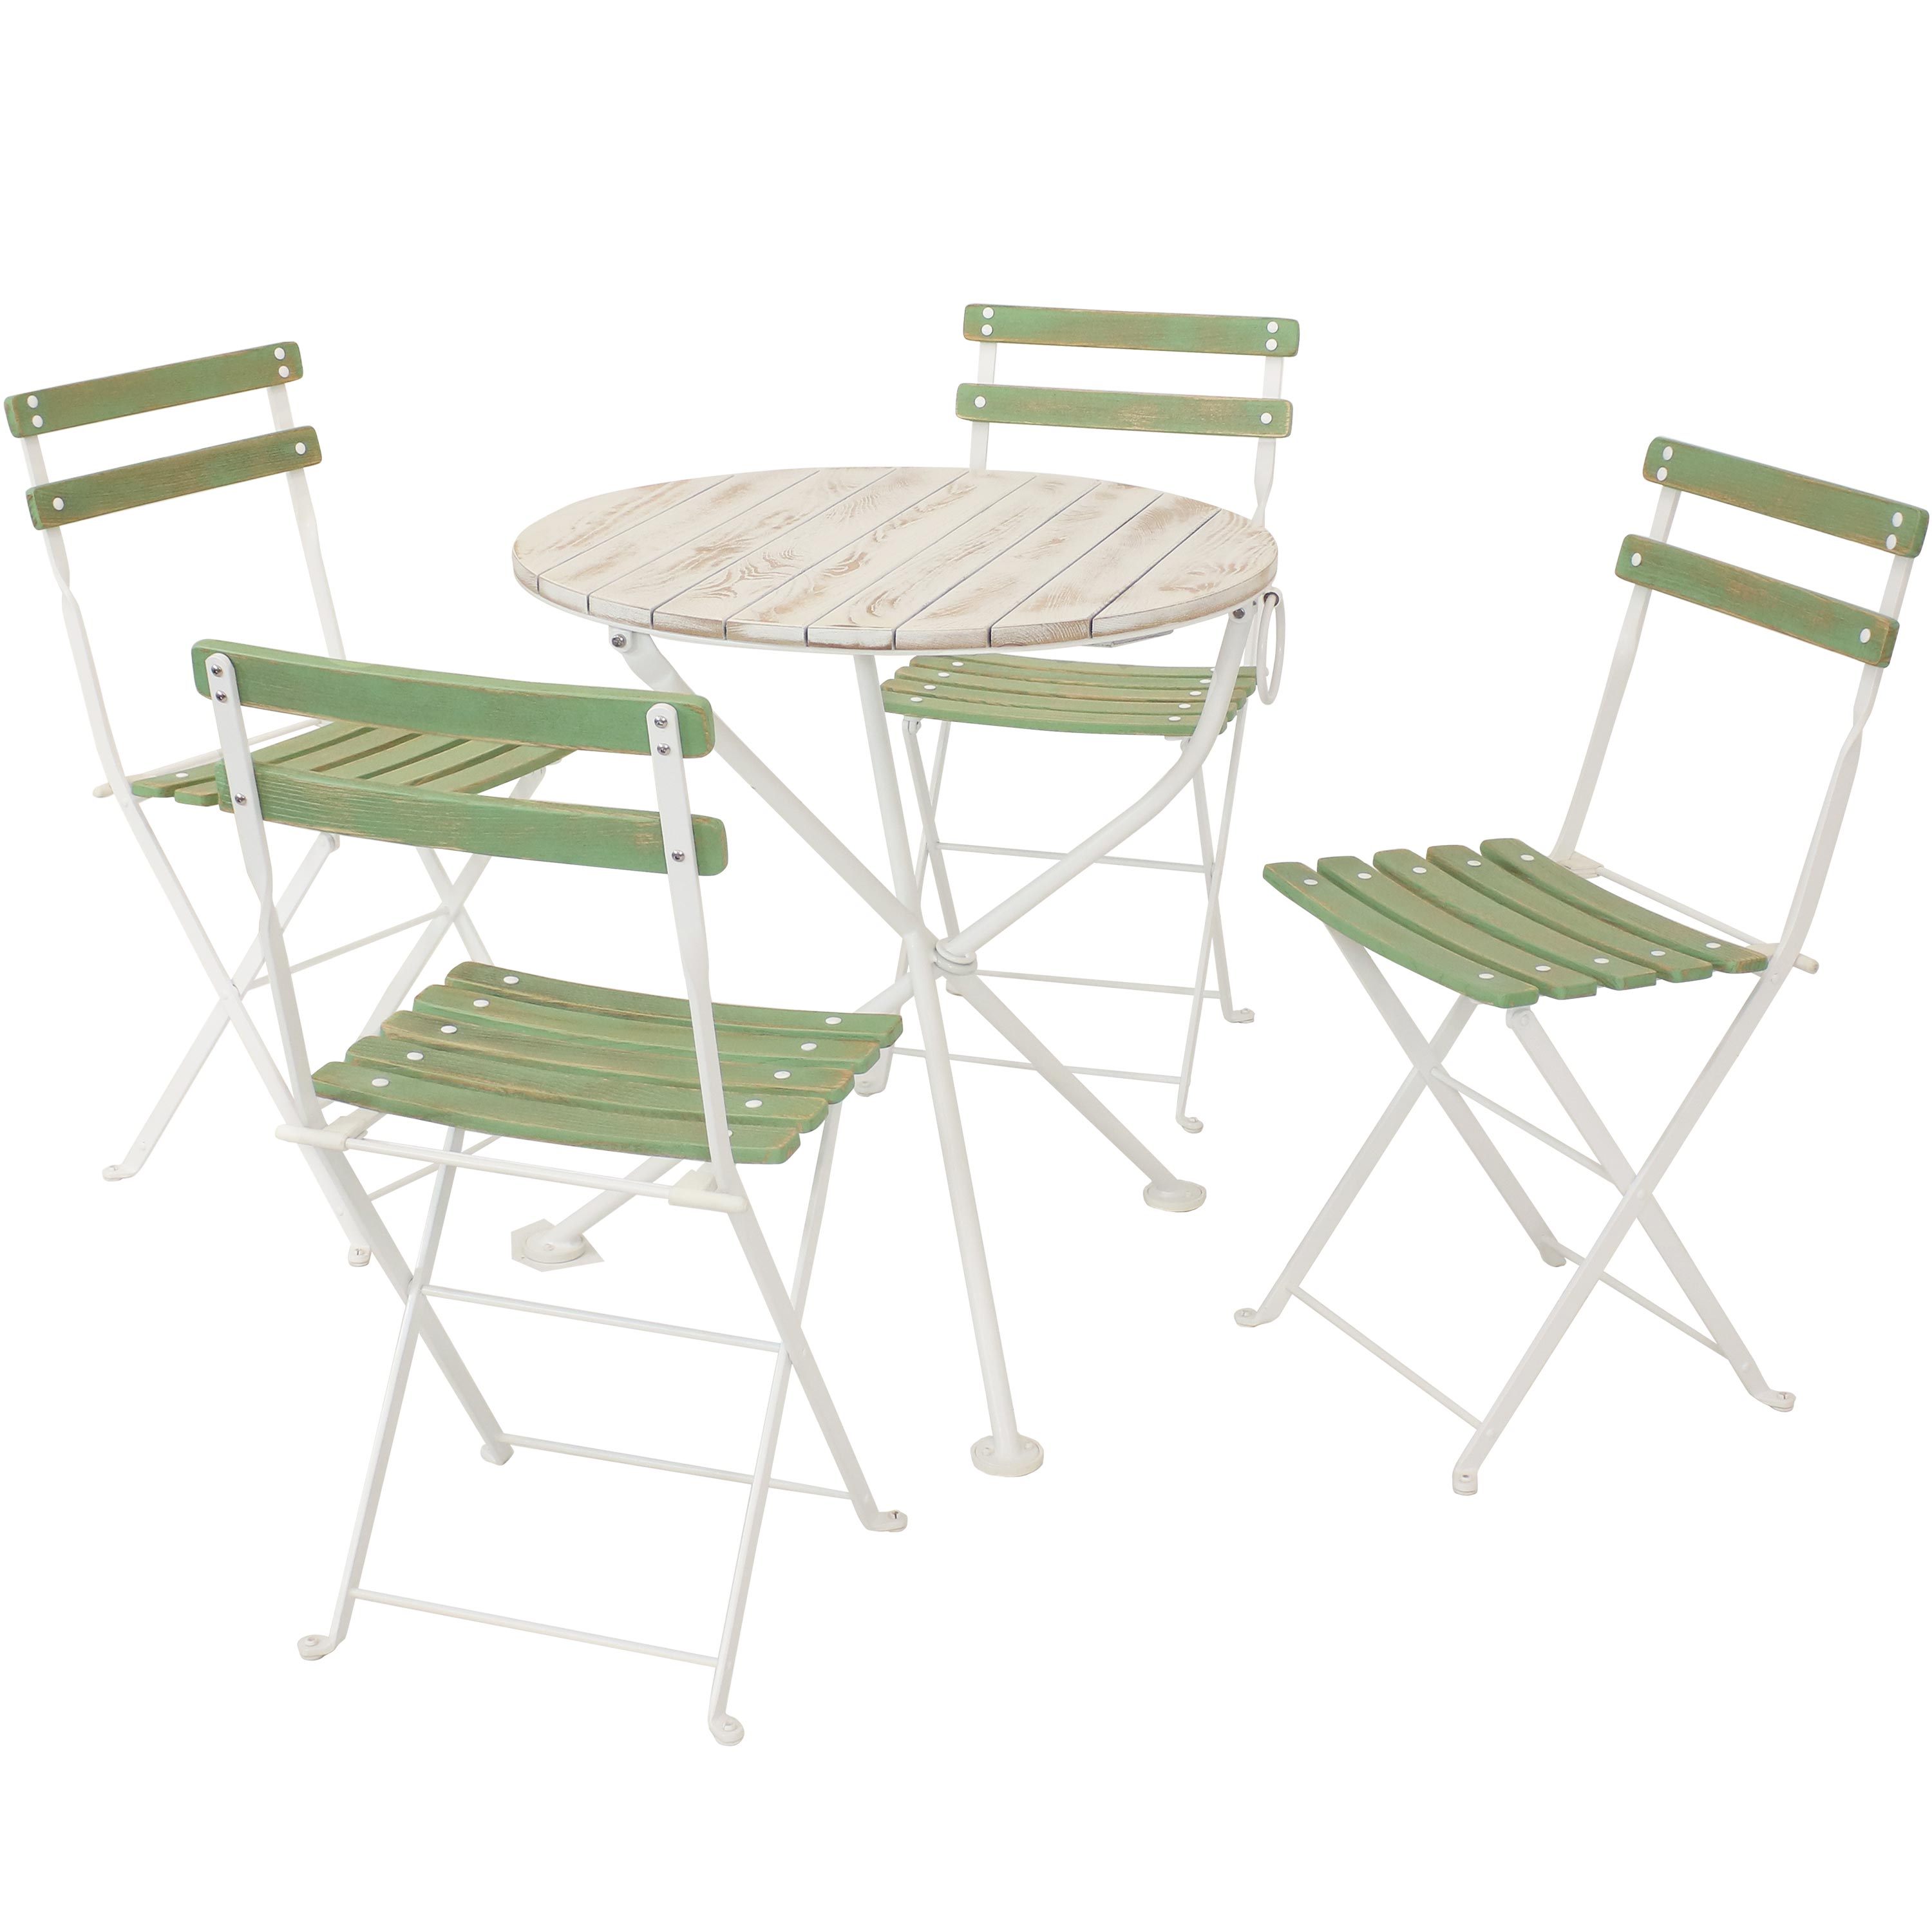 Sunnydaze Indoor/Outdoor Classic European Café Chestnut Wood Folding Bistro Table and Chairs - Antique Green - 5pc - image 1 of 9